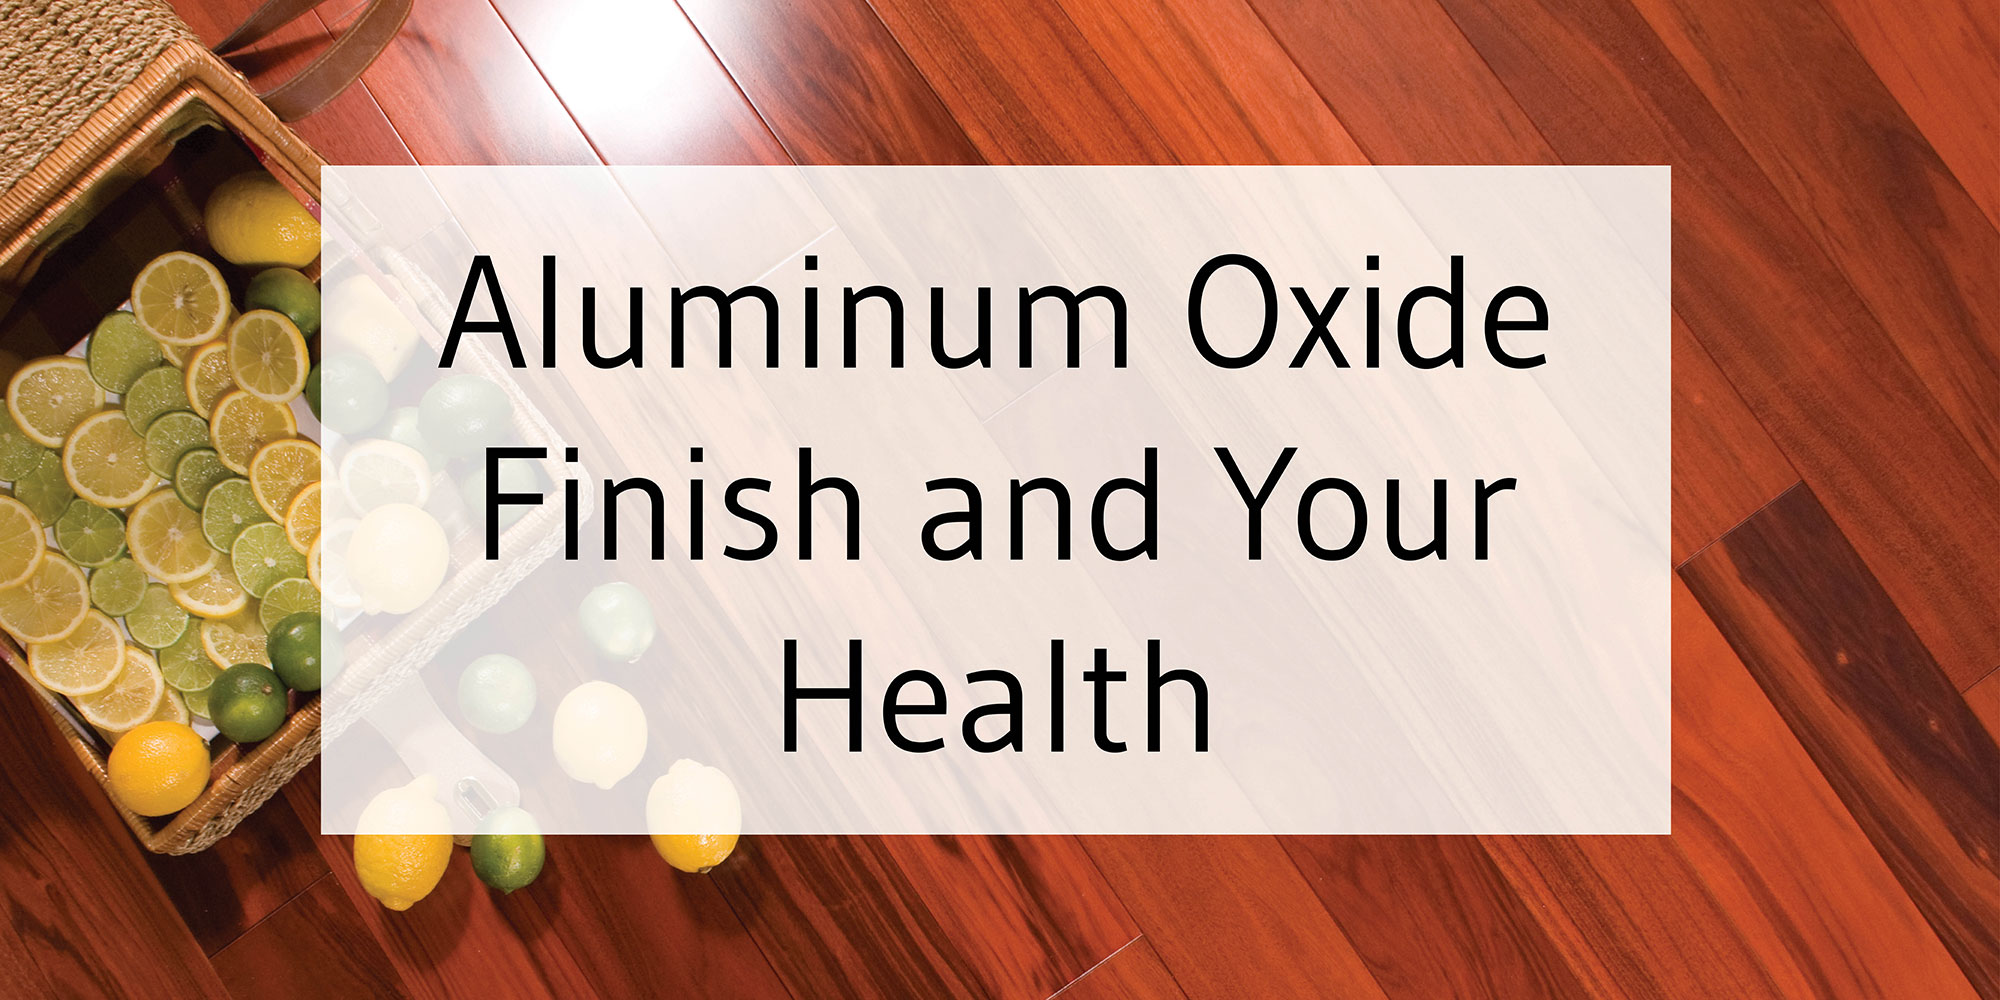 Aluminum Oxide Finish And Your Health, Best Protective Coating For Hardwood Floors